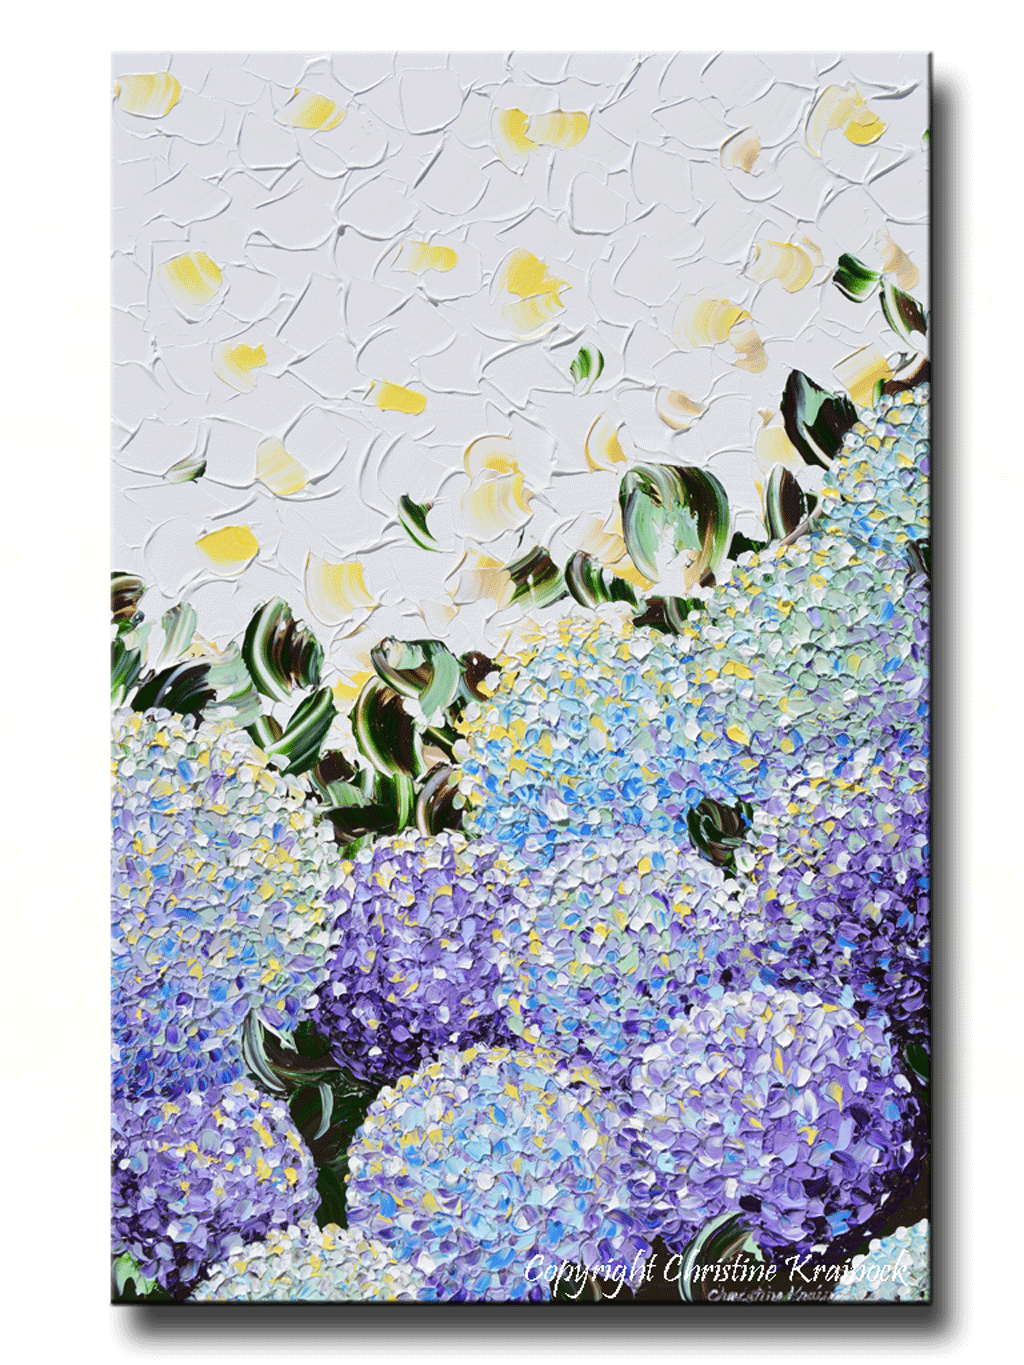 Load image into Gallery viewer, GICLEE PRINT Art Abstract Painting Hydrangea Purple Lavender Blue White Flowers Canvas Prints - Christine Krainock Art - Contemporary Art by Christine - 1
